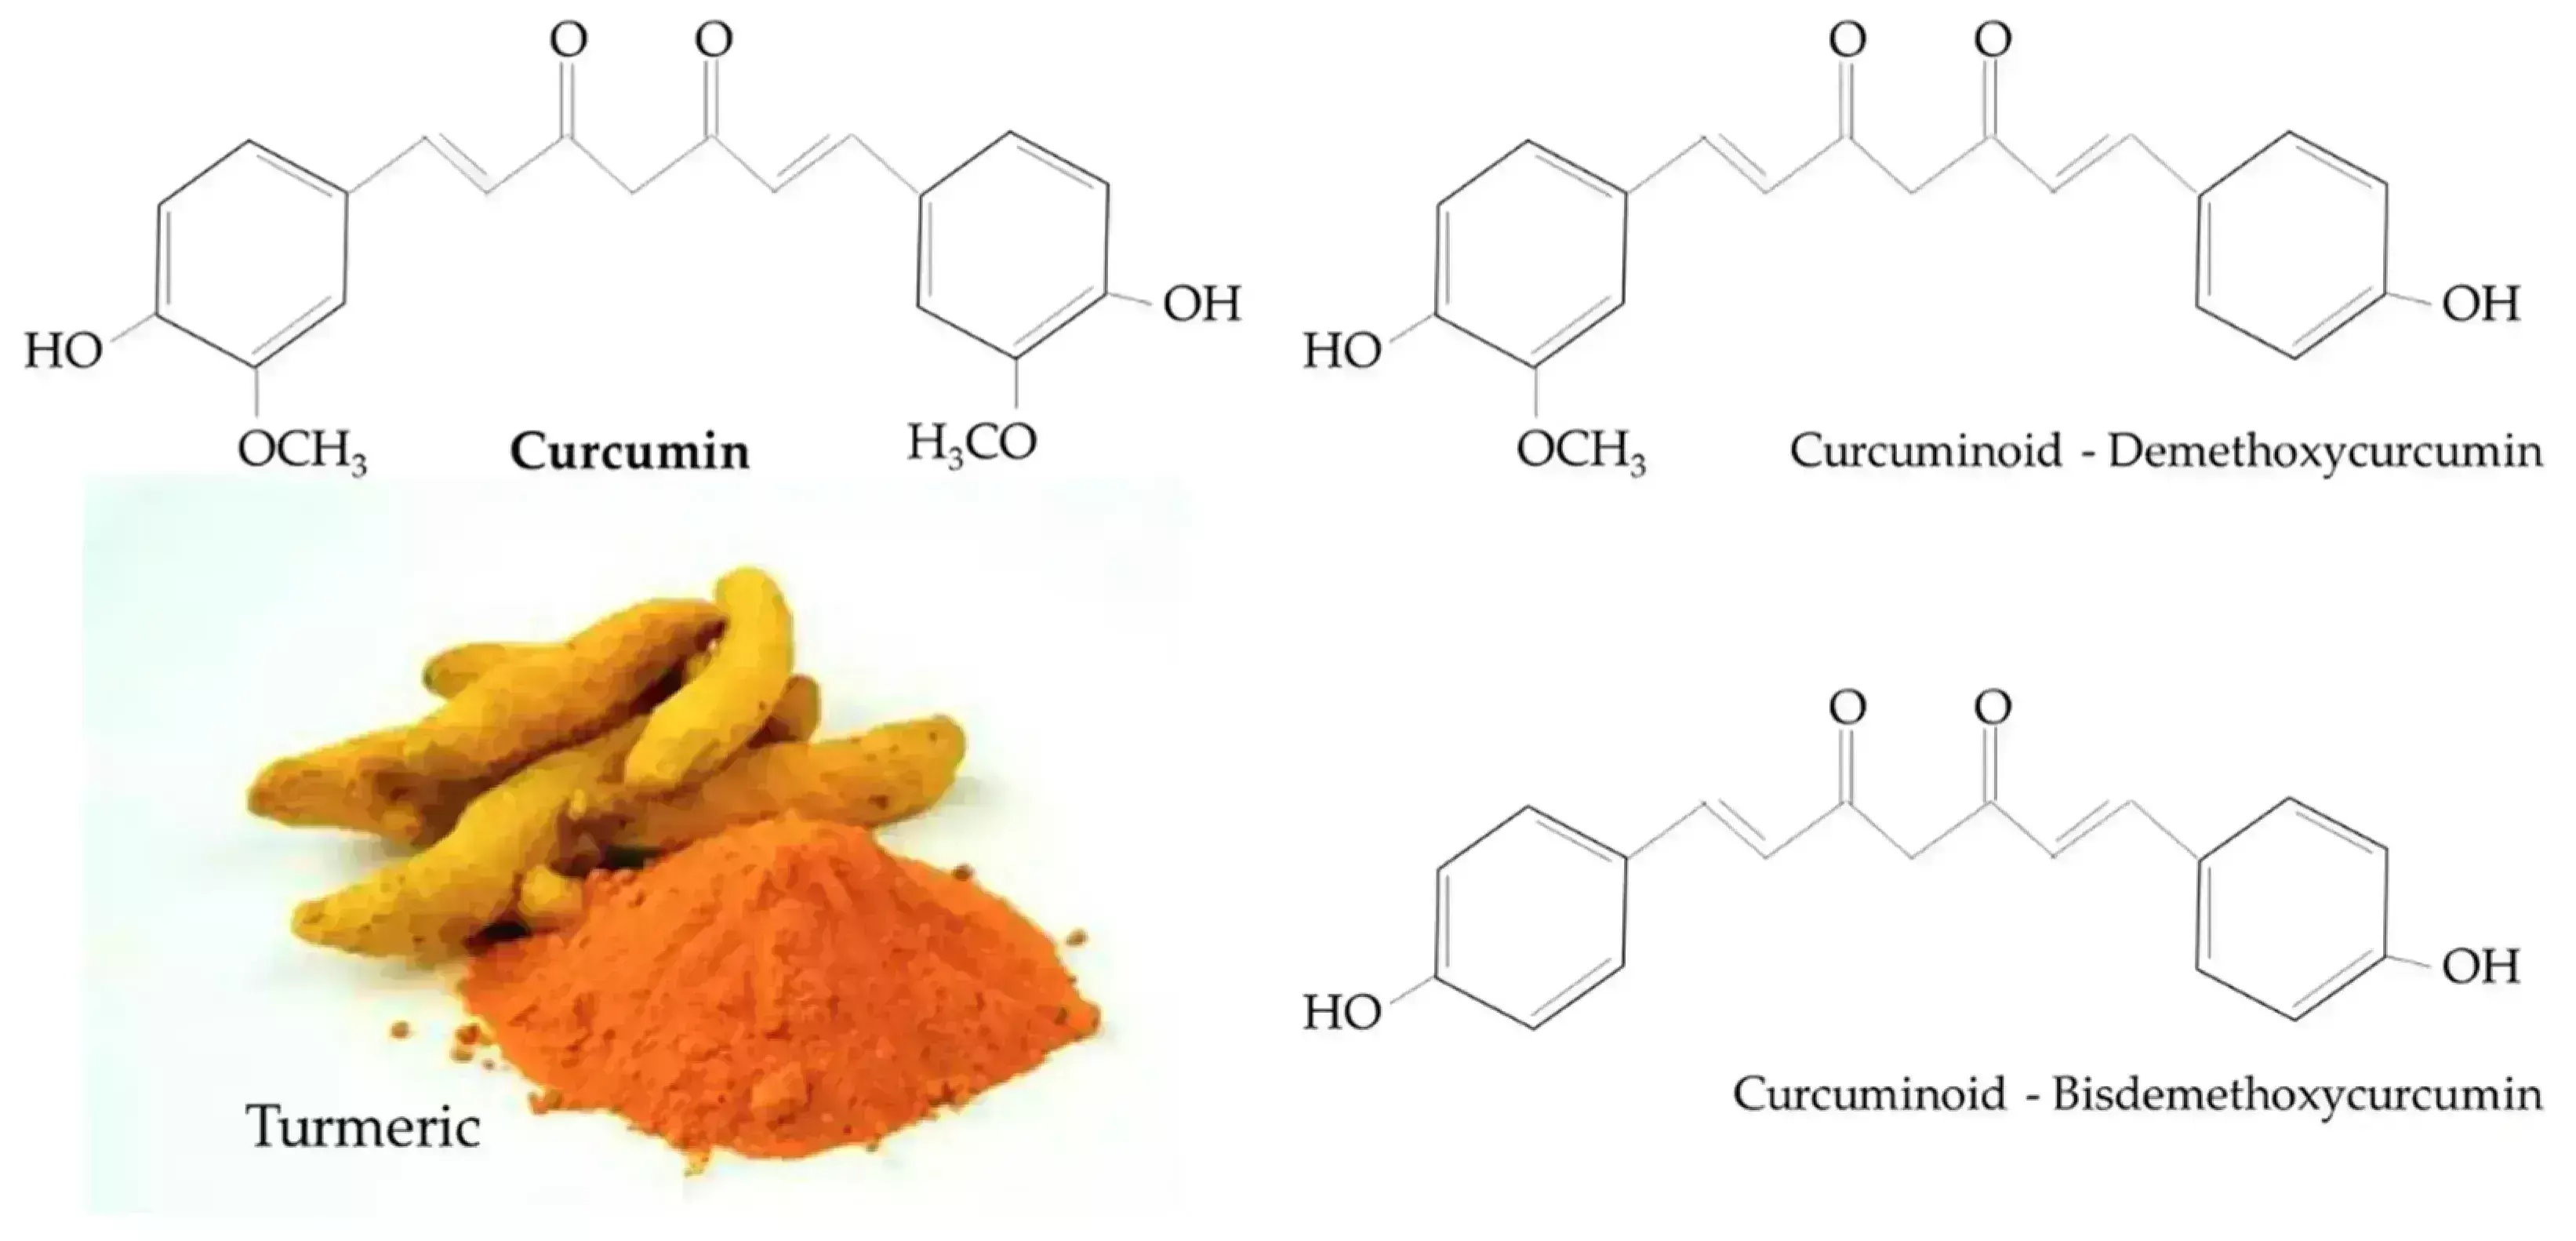 Curcumin can be used as a novel approach to improving lipid profile: Study